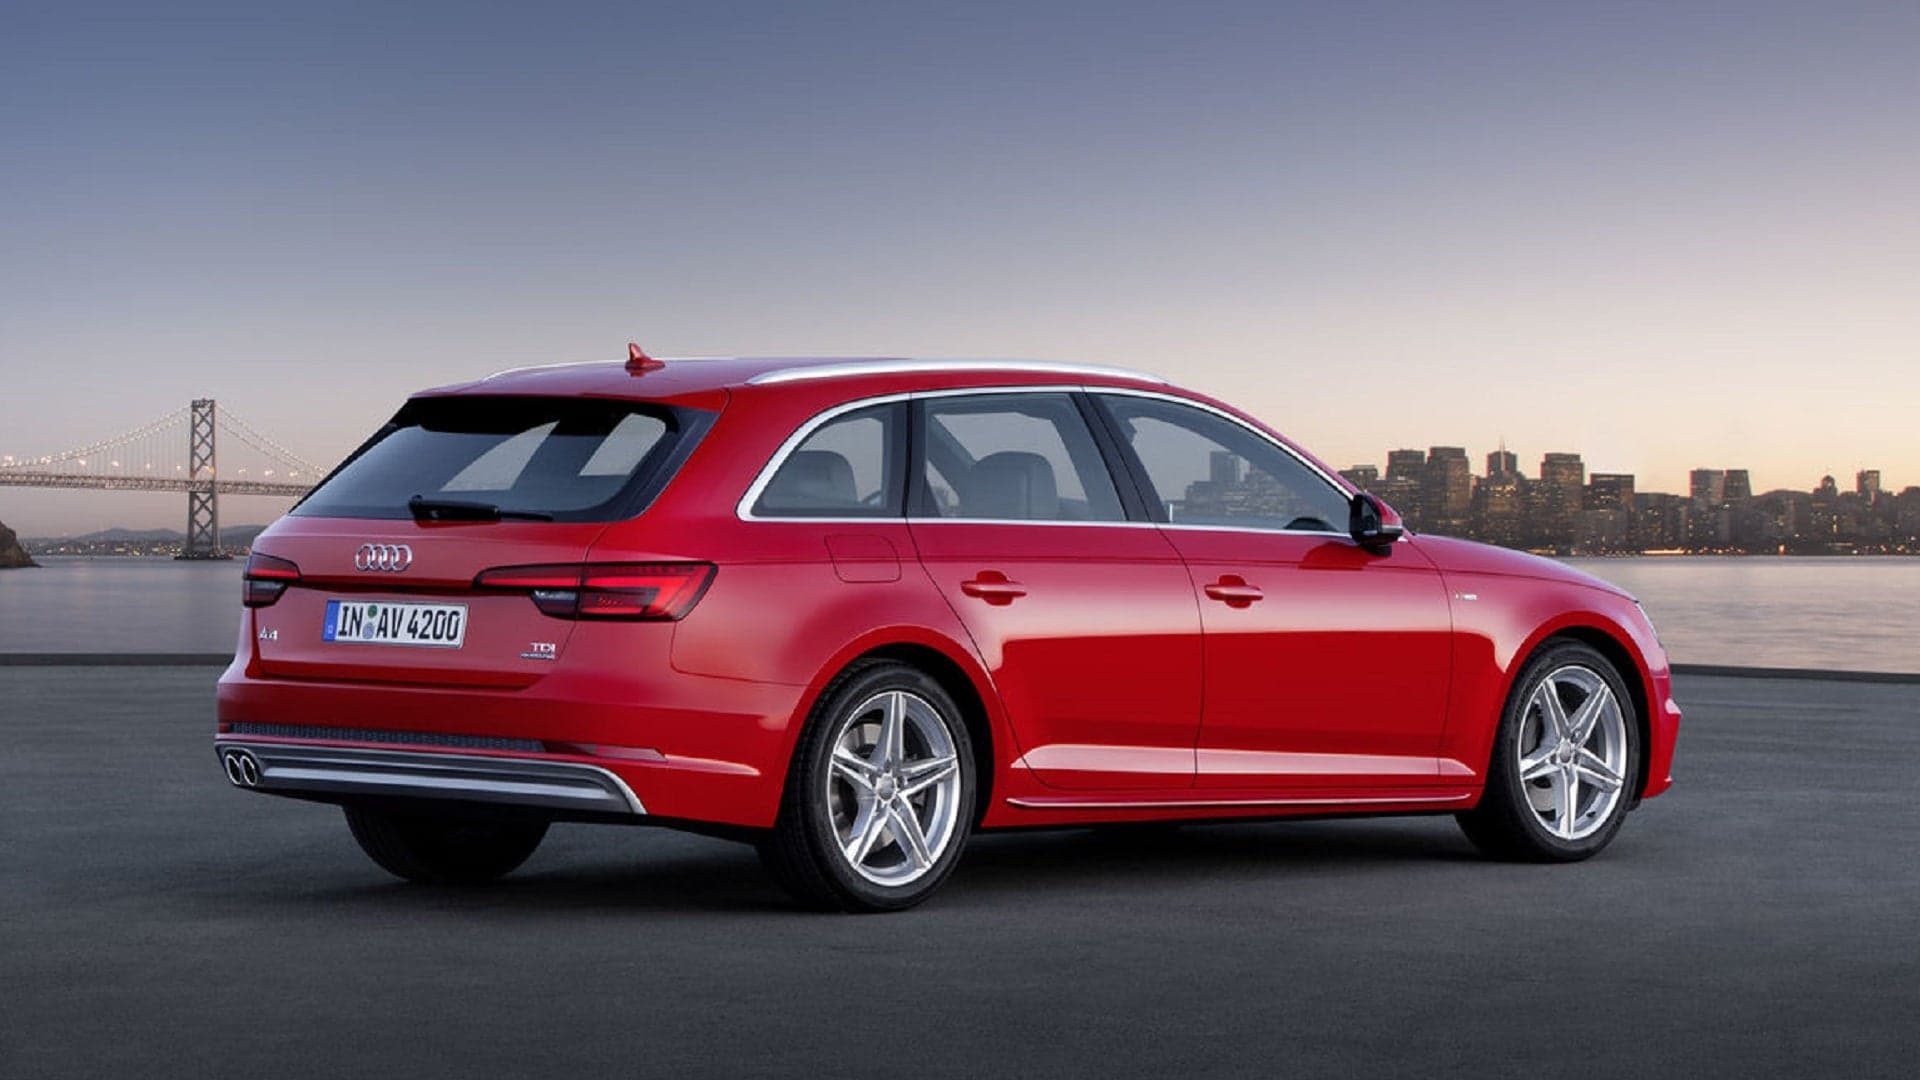 Audi Wants a Bigger SUV, More Wagons for the US